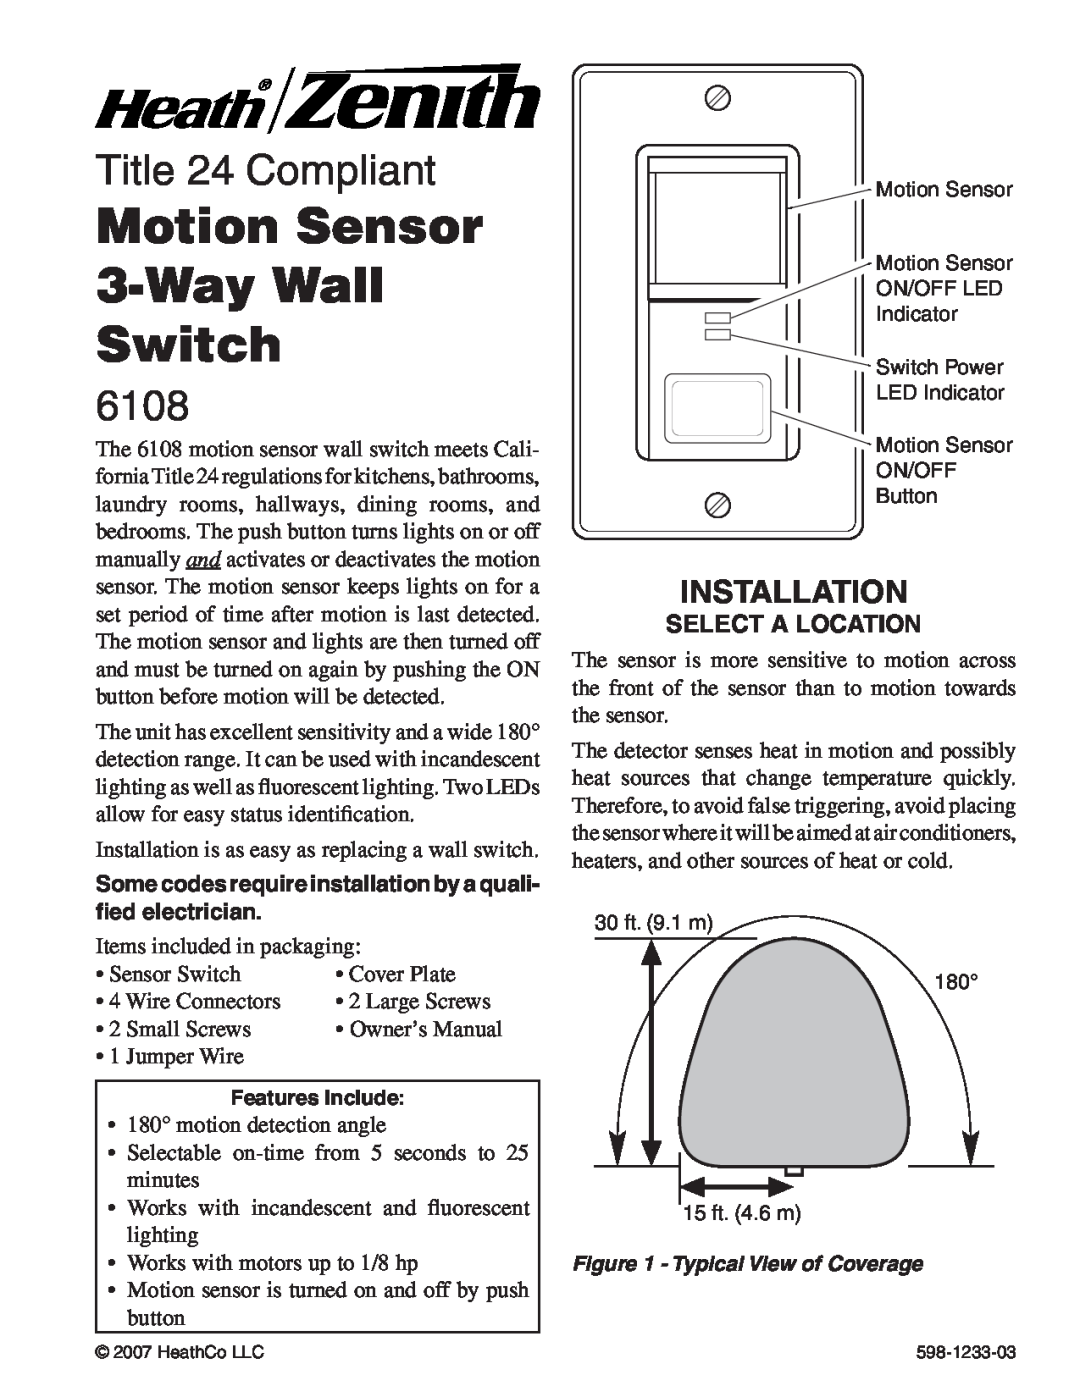 Heath Zenith 6108 owner manual Motion Sensor 3-WayWall Switch, Title 24 Compliant, Installation, Select A Location 